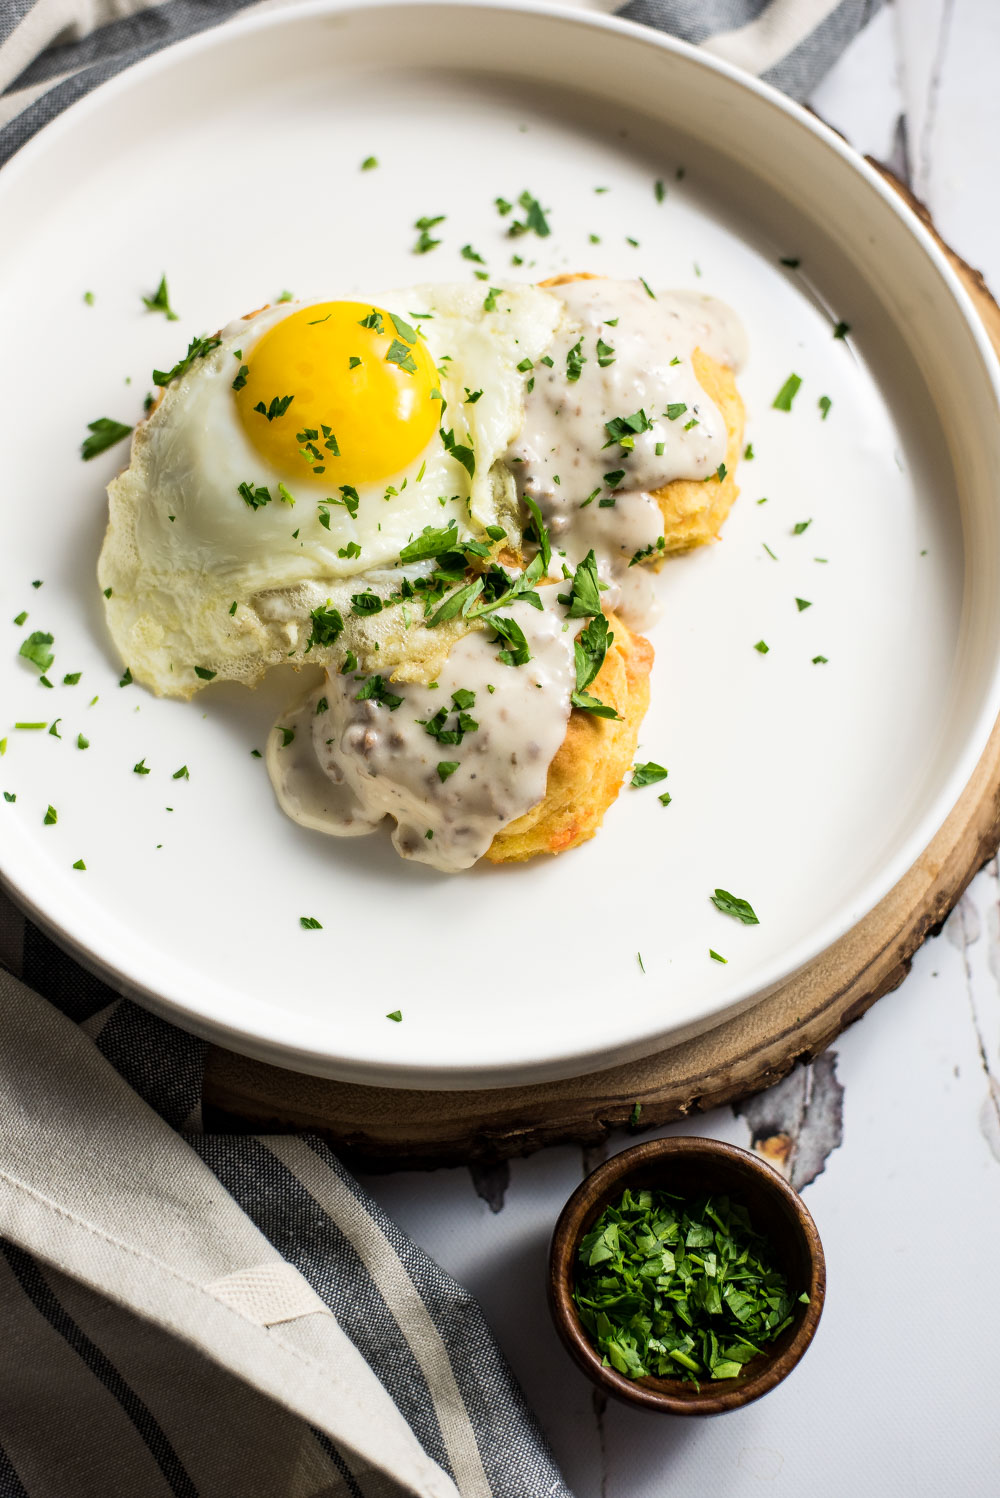 For breakfast, lunch, or dinner, these quick and simple sweet potato biscuits and gravy are a snap to whip up, super delicious, and insanely comforting!